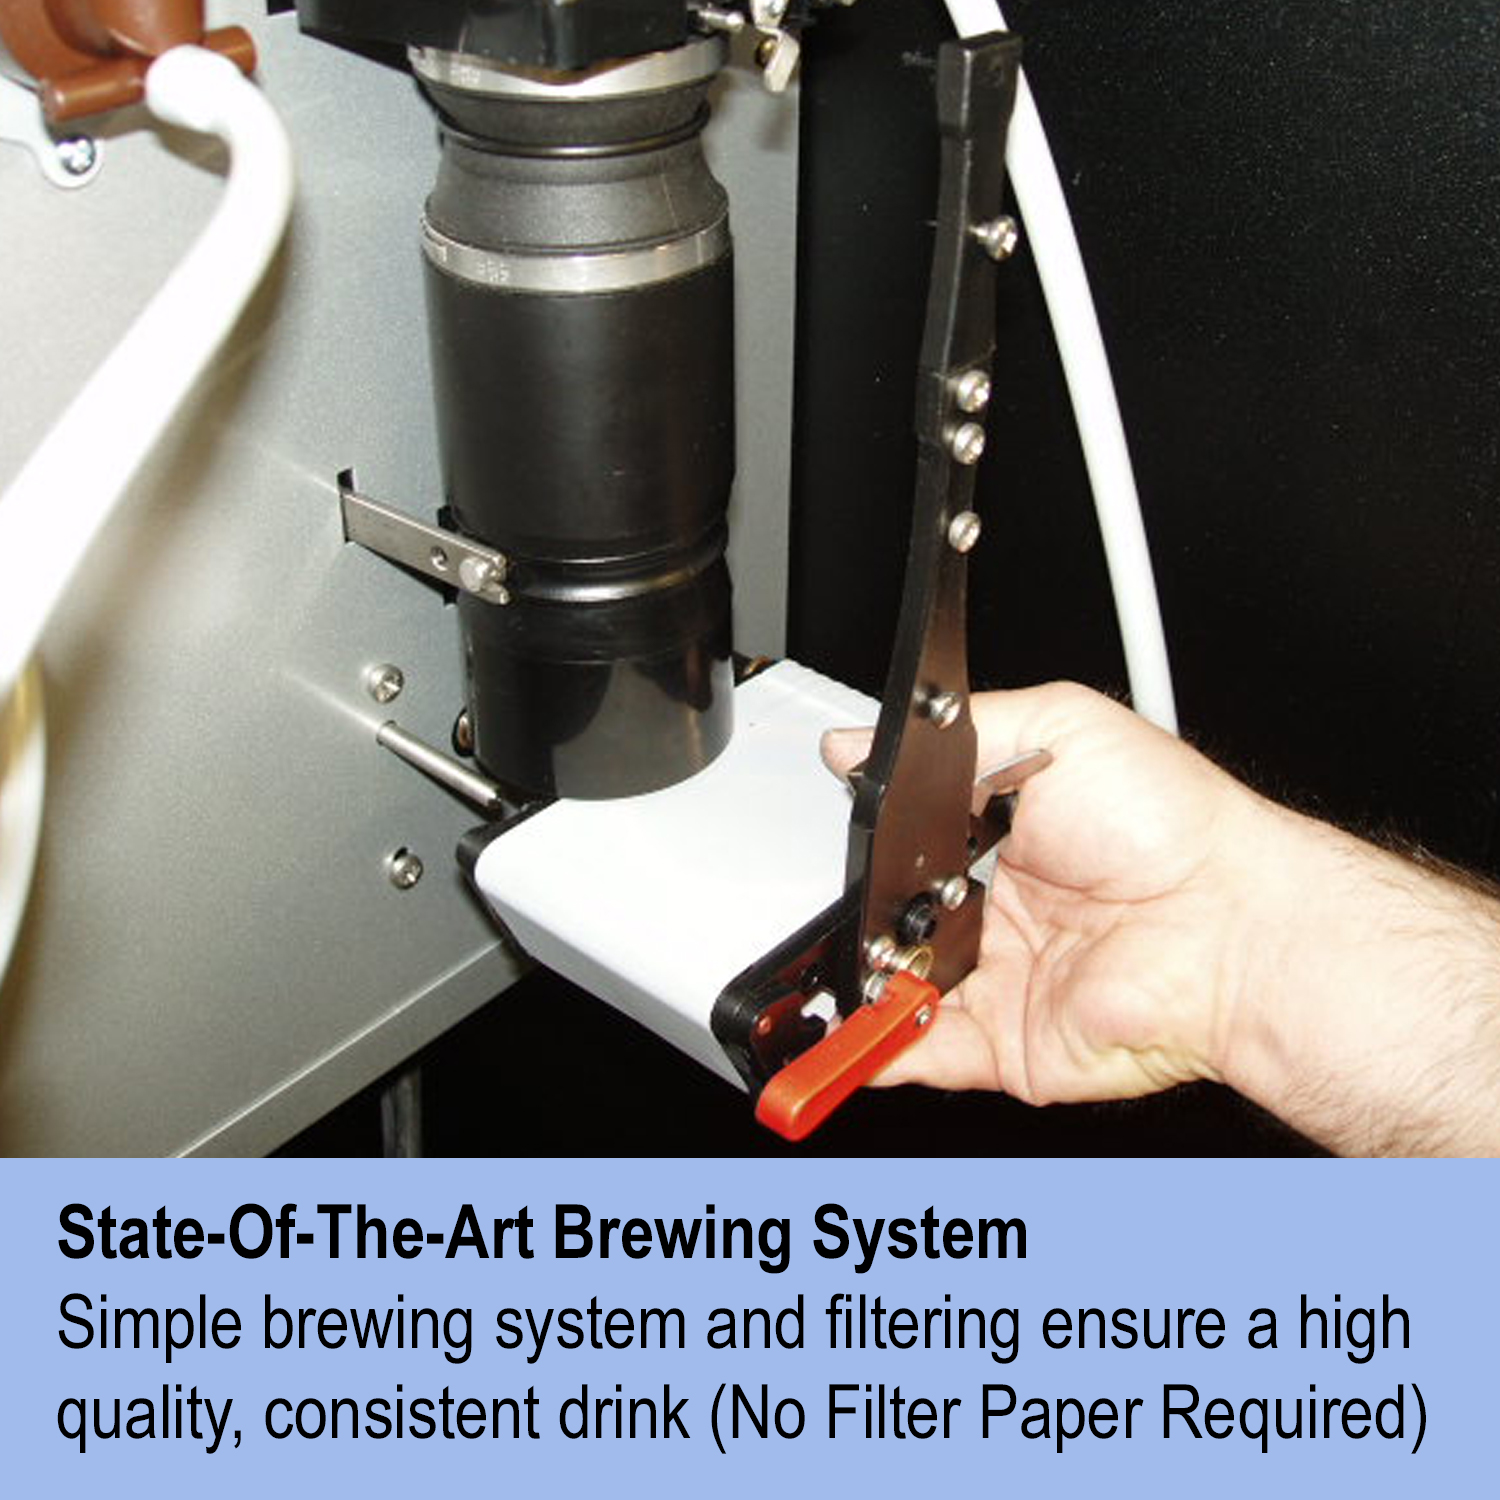 A state-of-the-art brewing system that does not require a filter on the Coffee Hot Beverage Vending Machine.